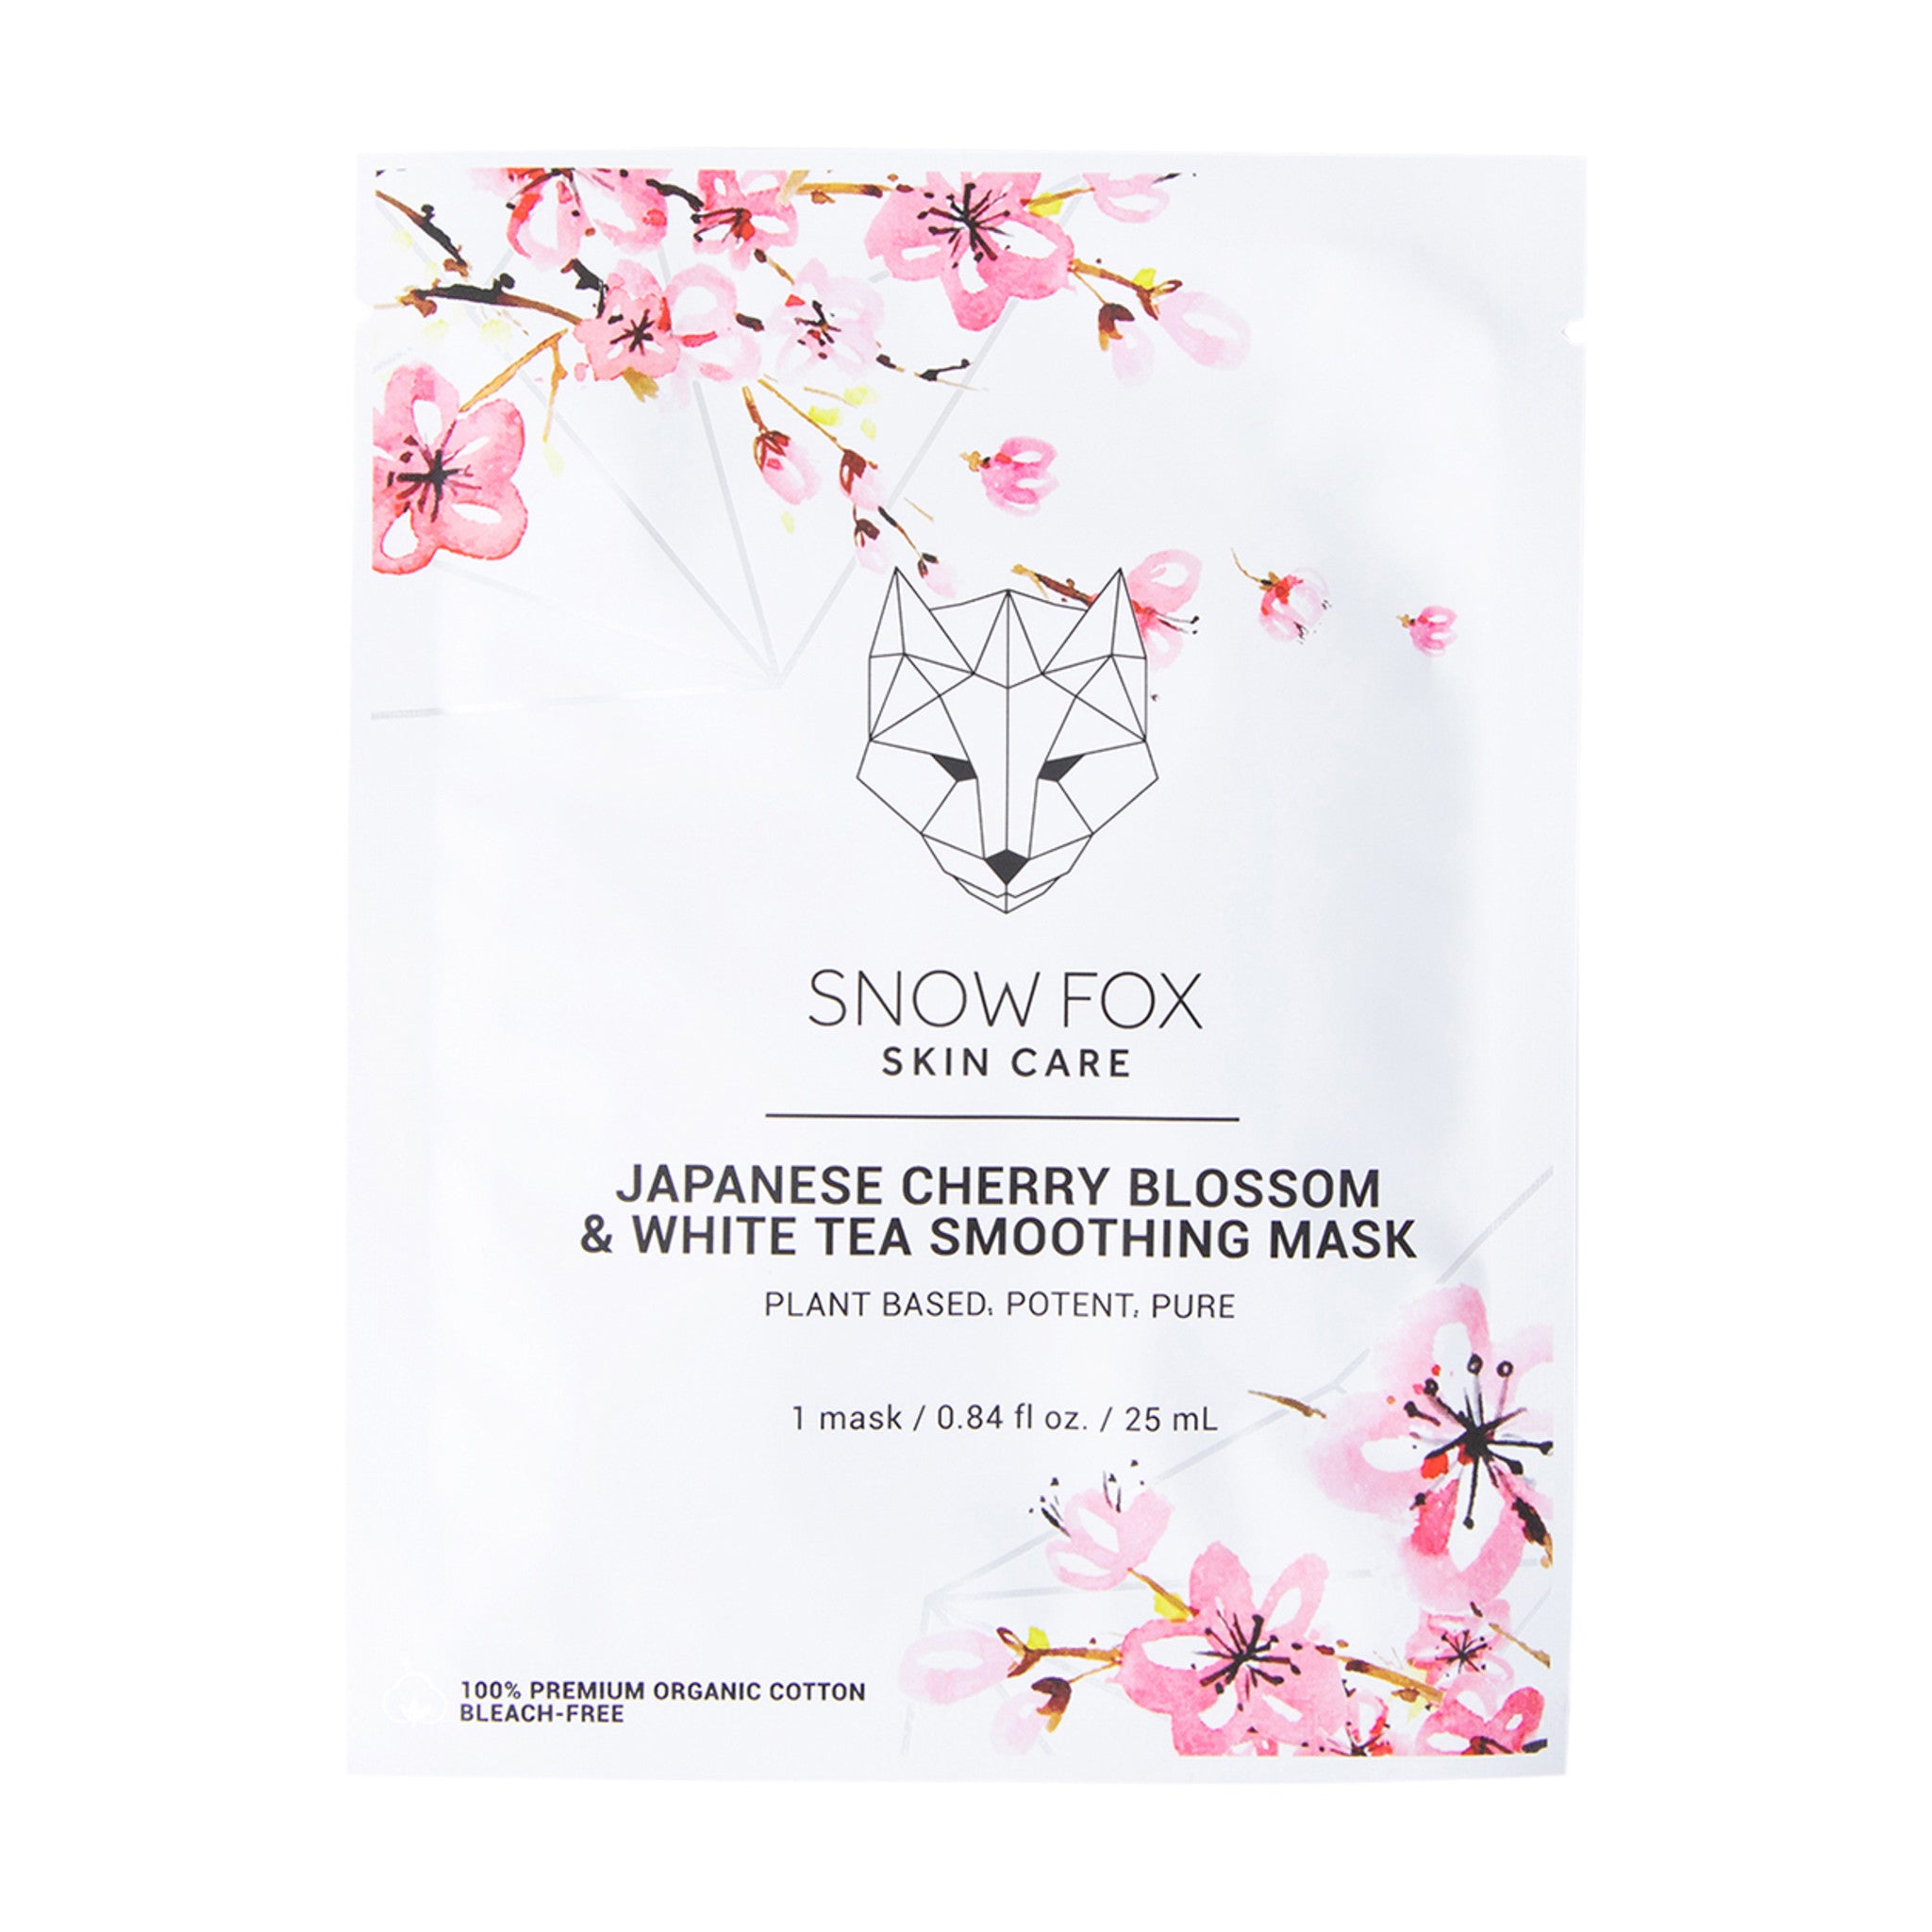 Snow Fox Skincare Japanese Cherry Blossom and White Tea Smoothing Mask Size variant: 1 Treatment main image.